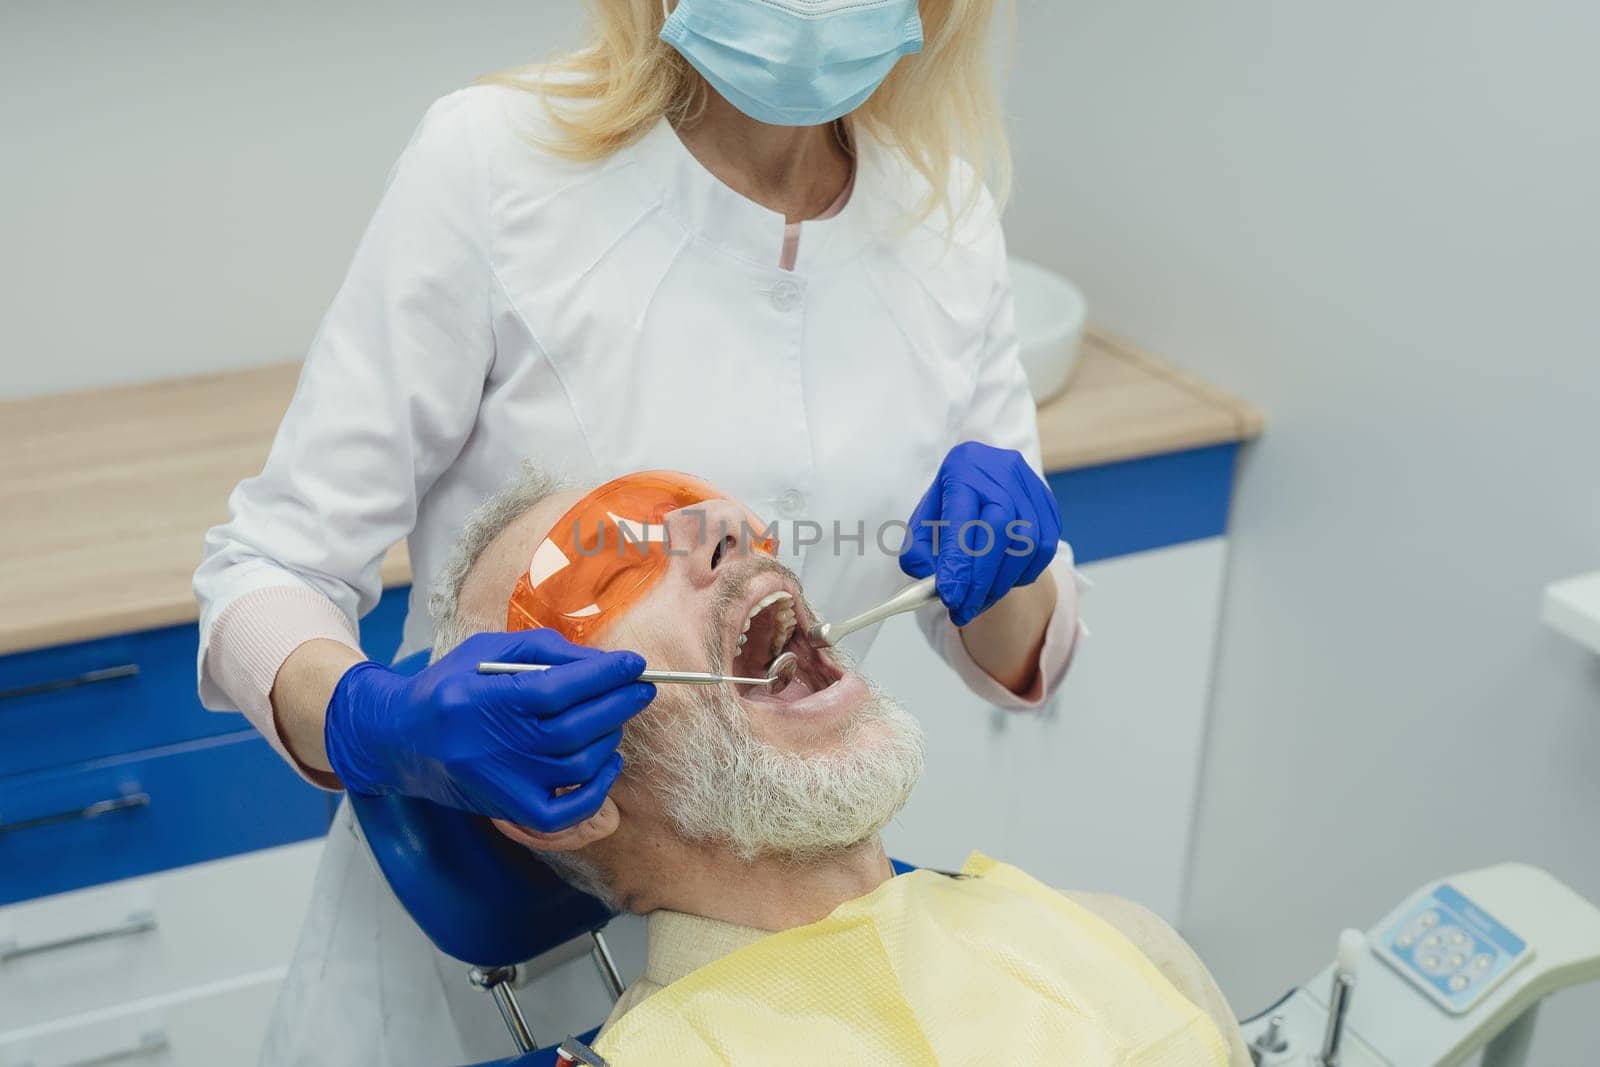 Male smiling during her dental treatment at dentist.